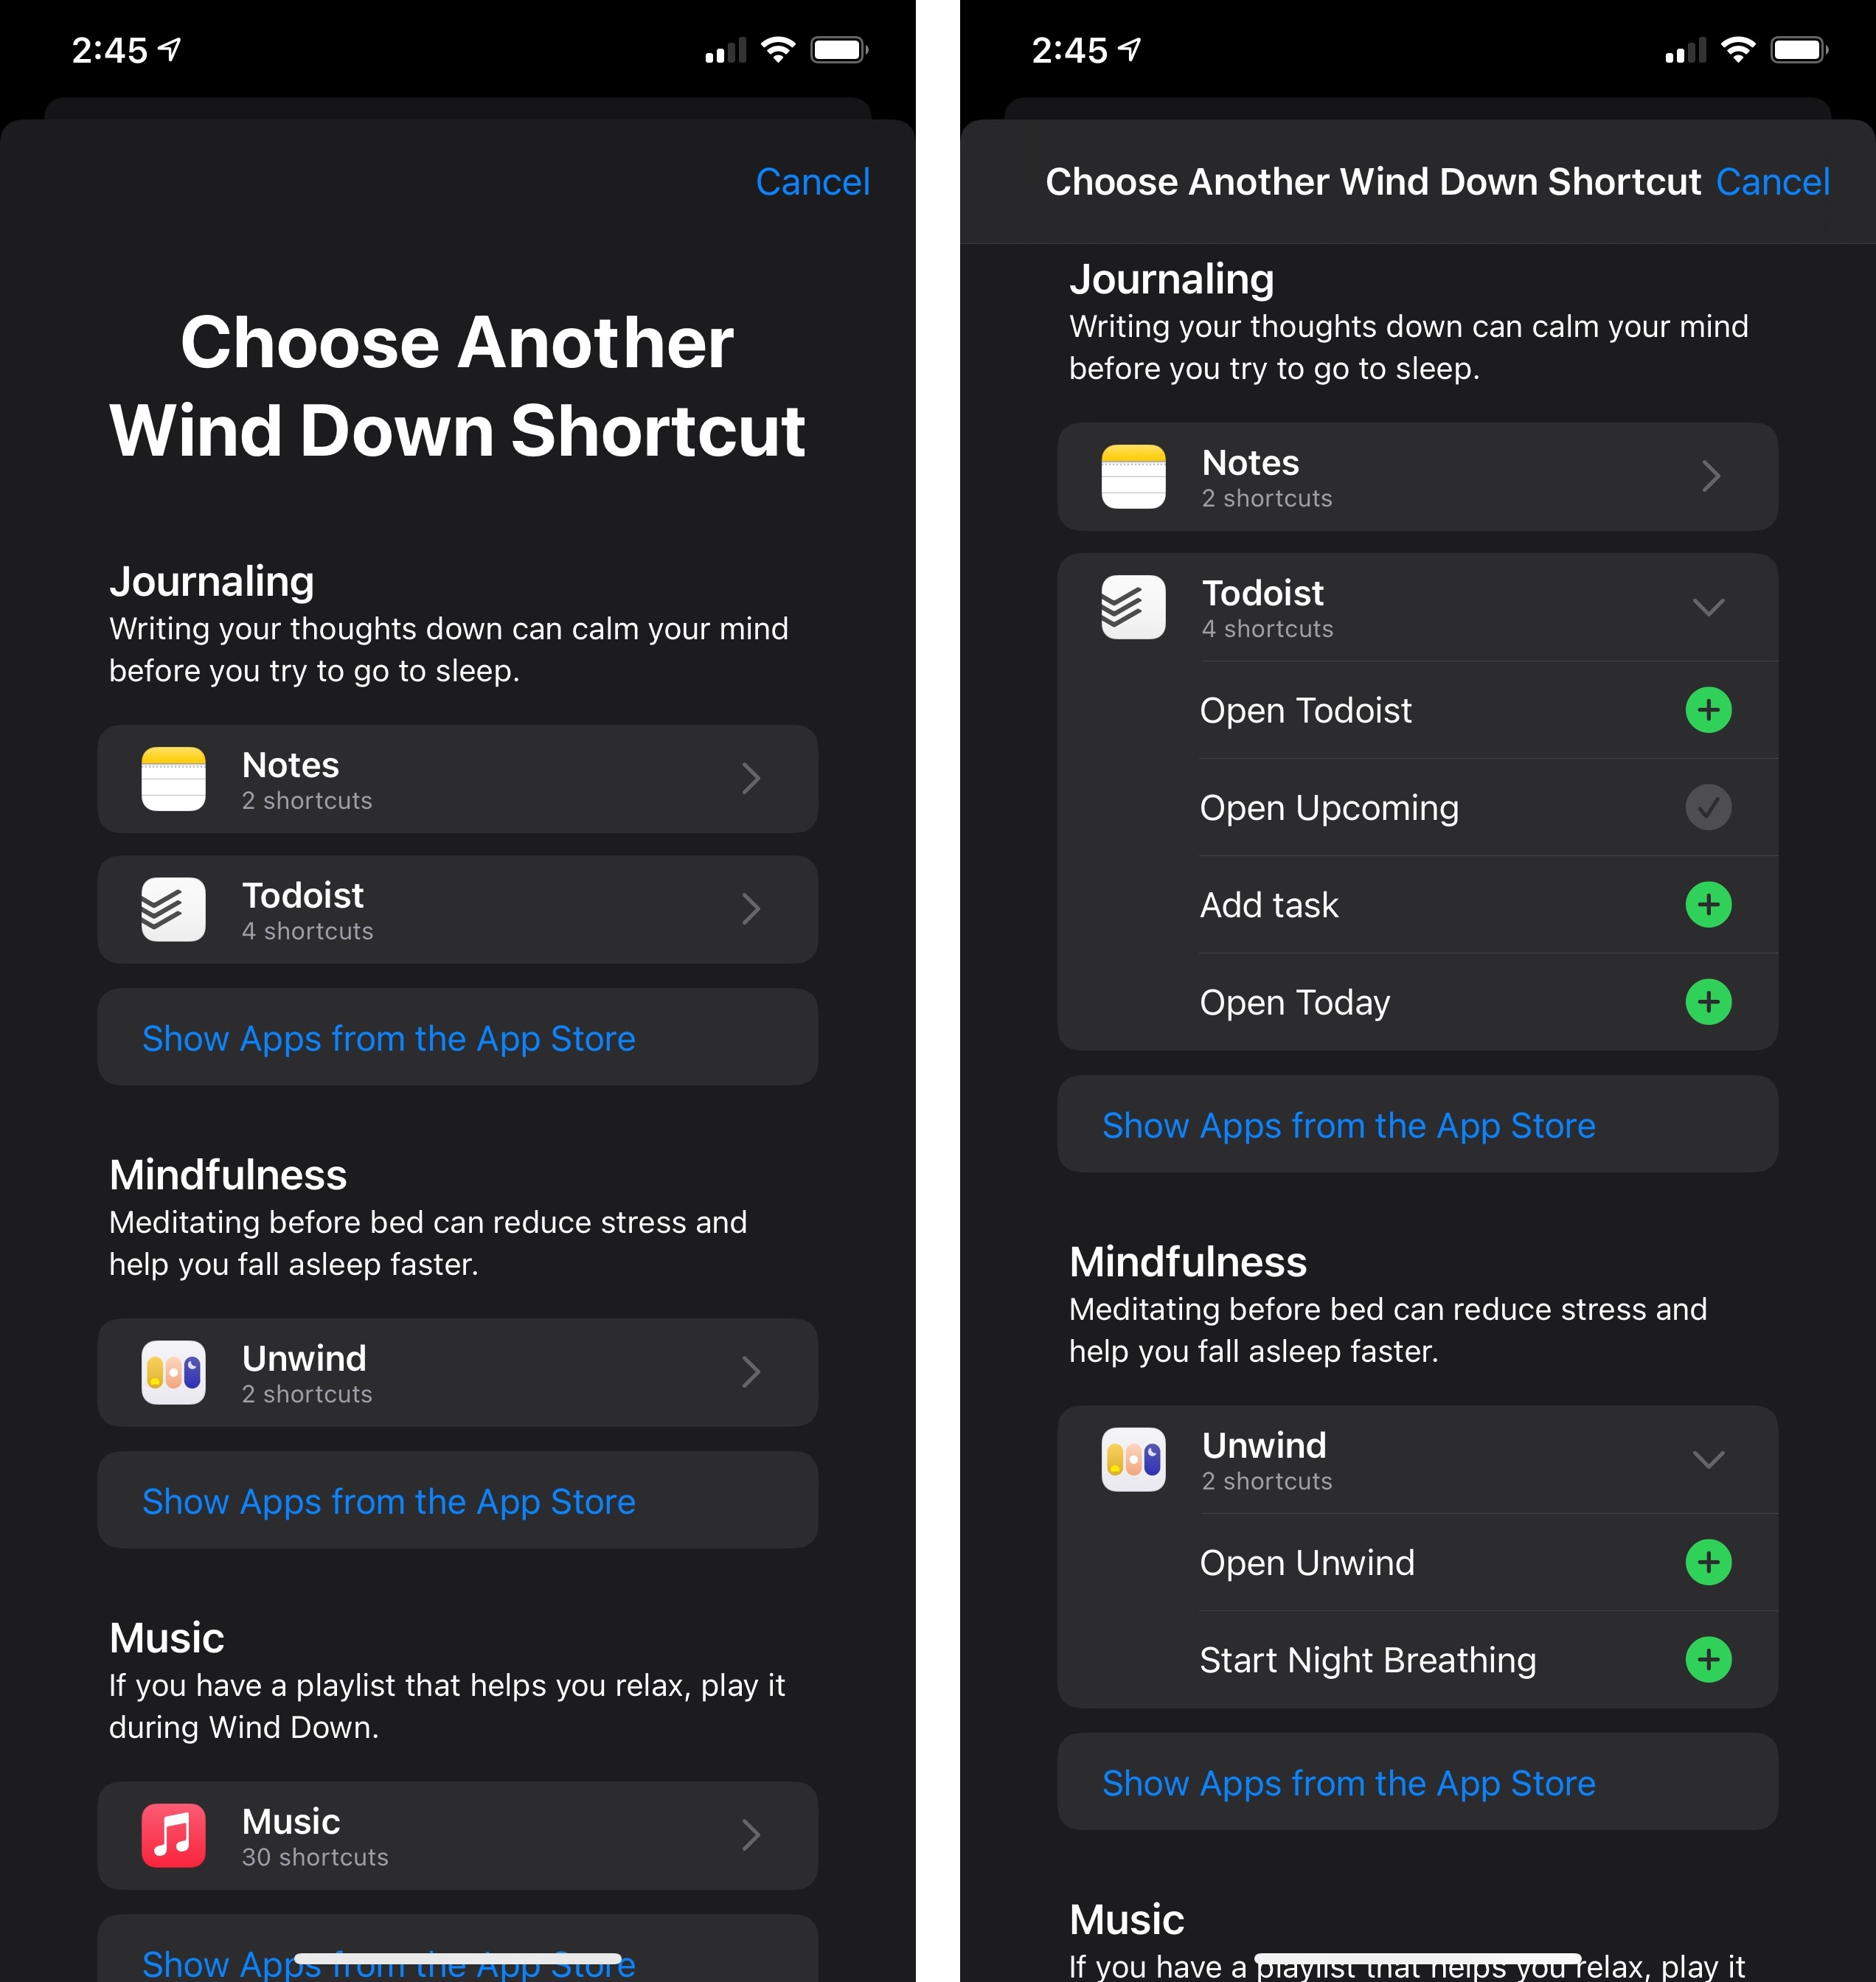 Shortcuts you add from Health's recommendations will also appear in the Shortcuts app as one-action shortcuts.